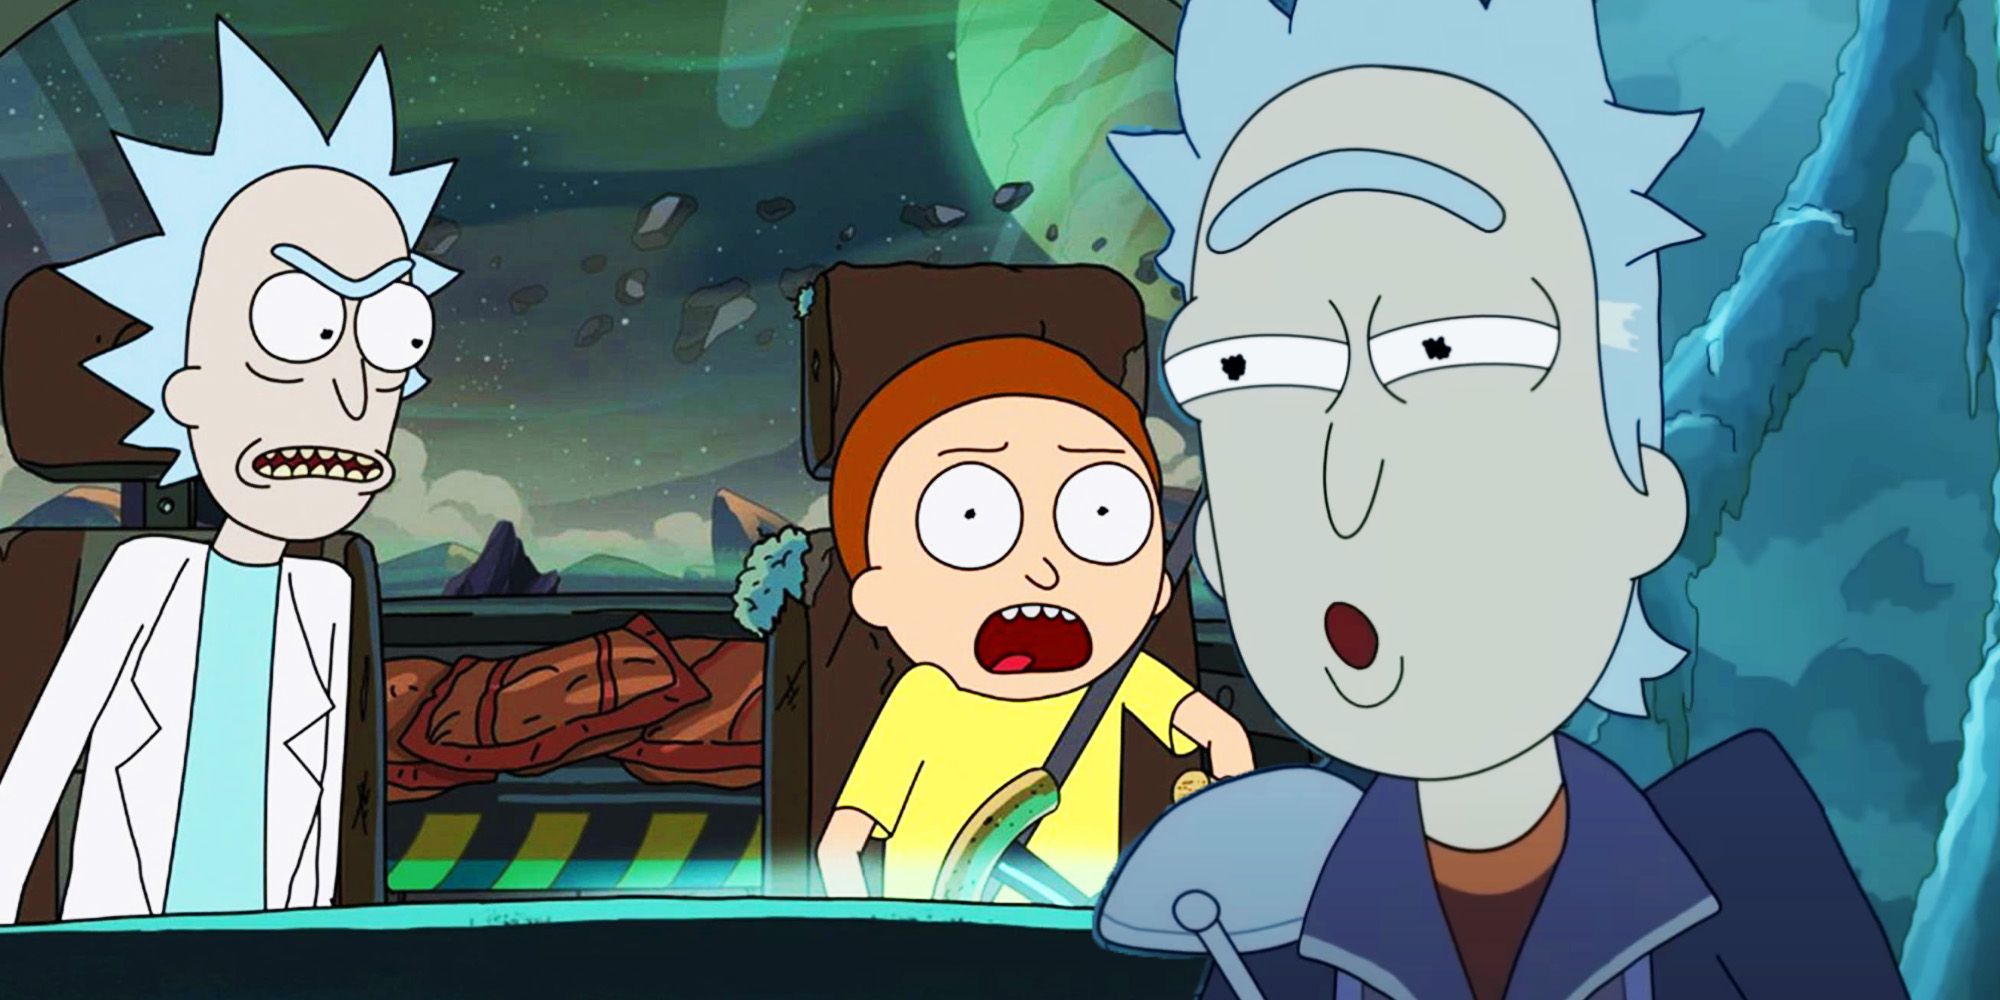 10 Wild Rick & Morty Season 7 Theories That Could Actually Come True